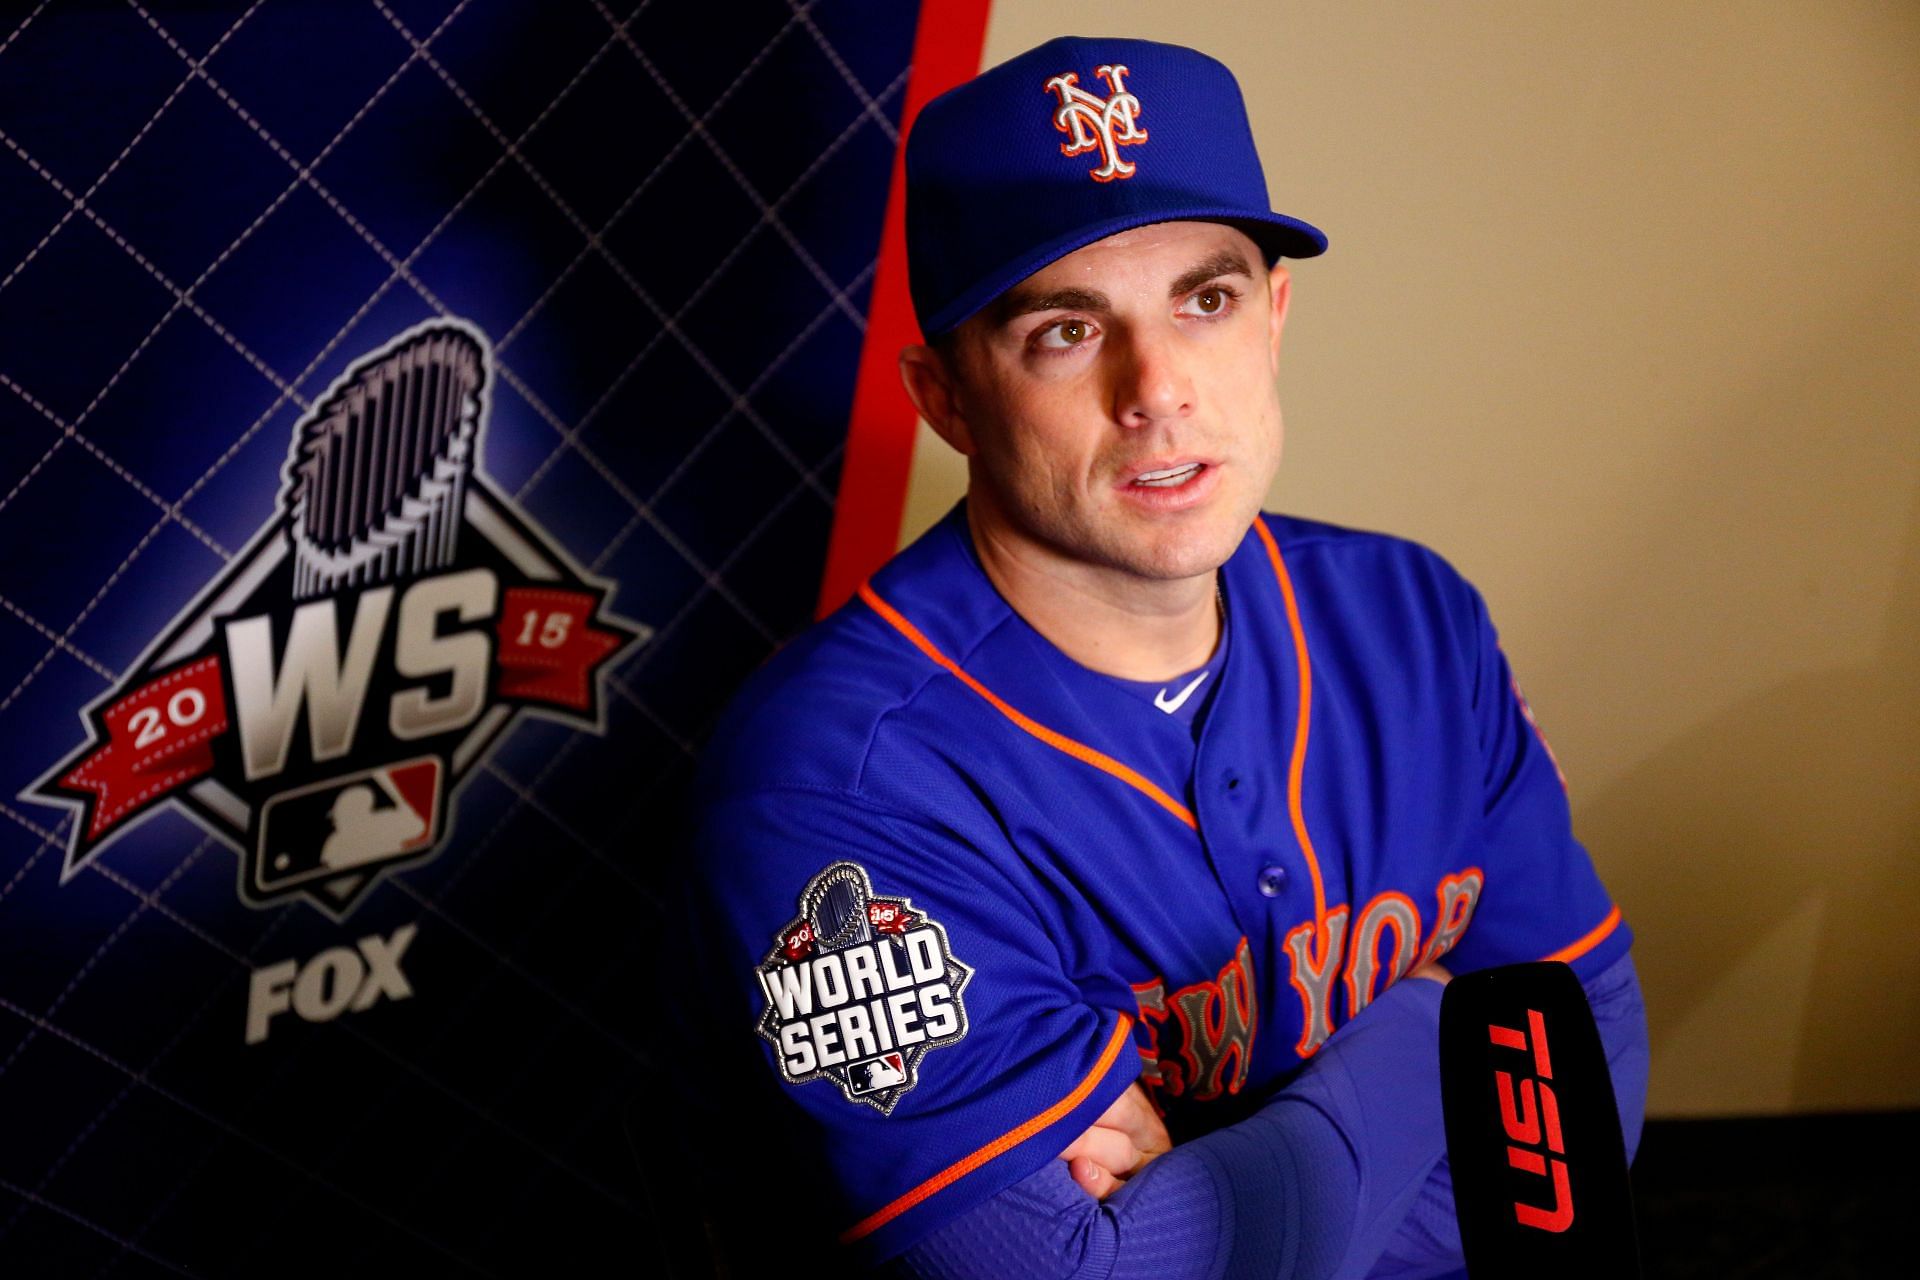 World Series Workout with David Wright